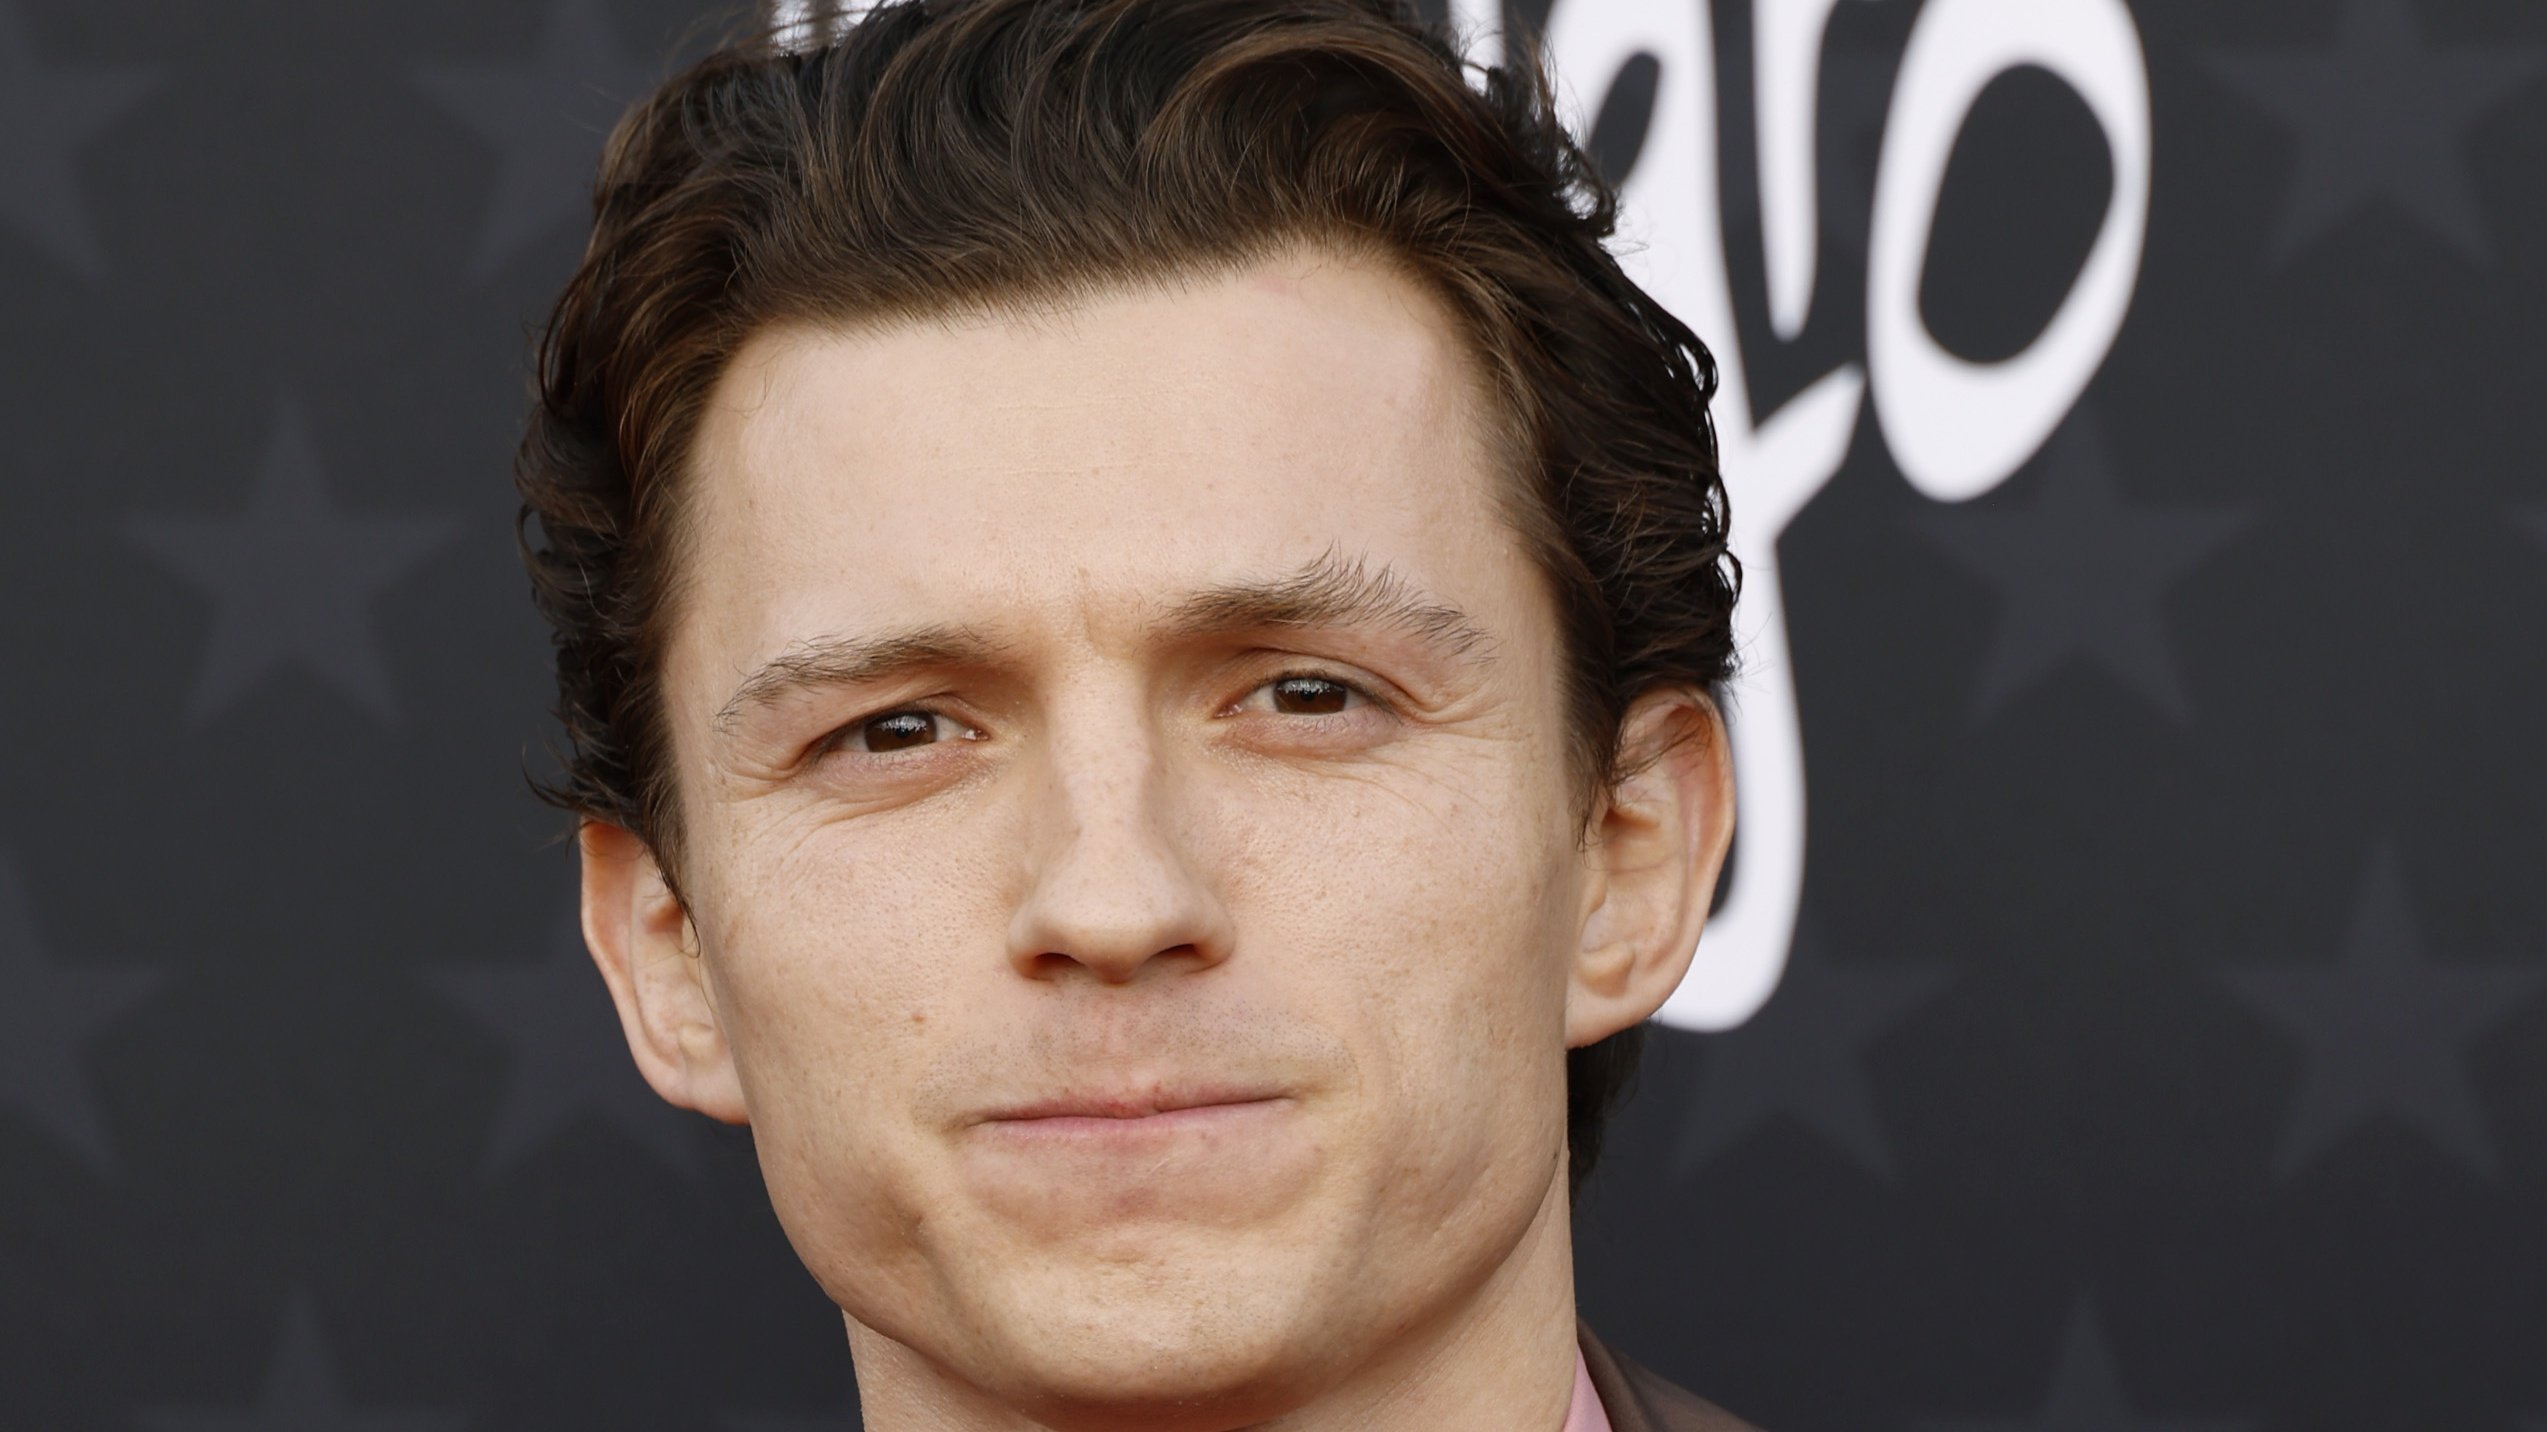 Tom Holland Slammed for Remaining Silent as Costar Endures Racial Abuse from Trolls